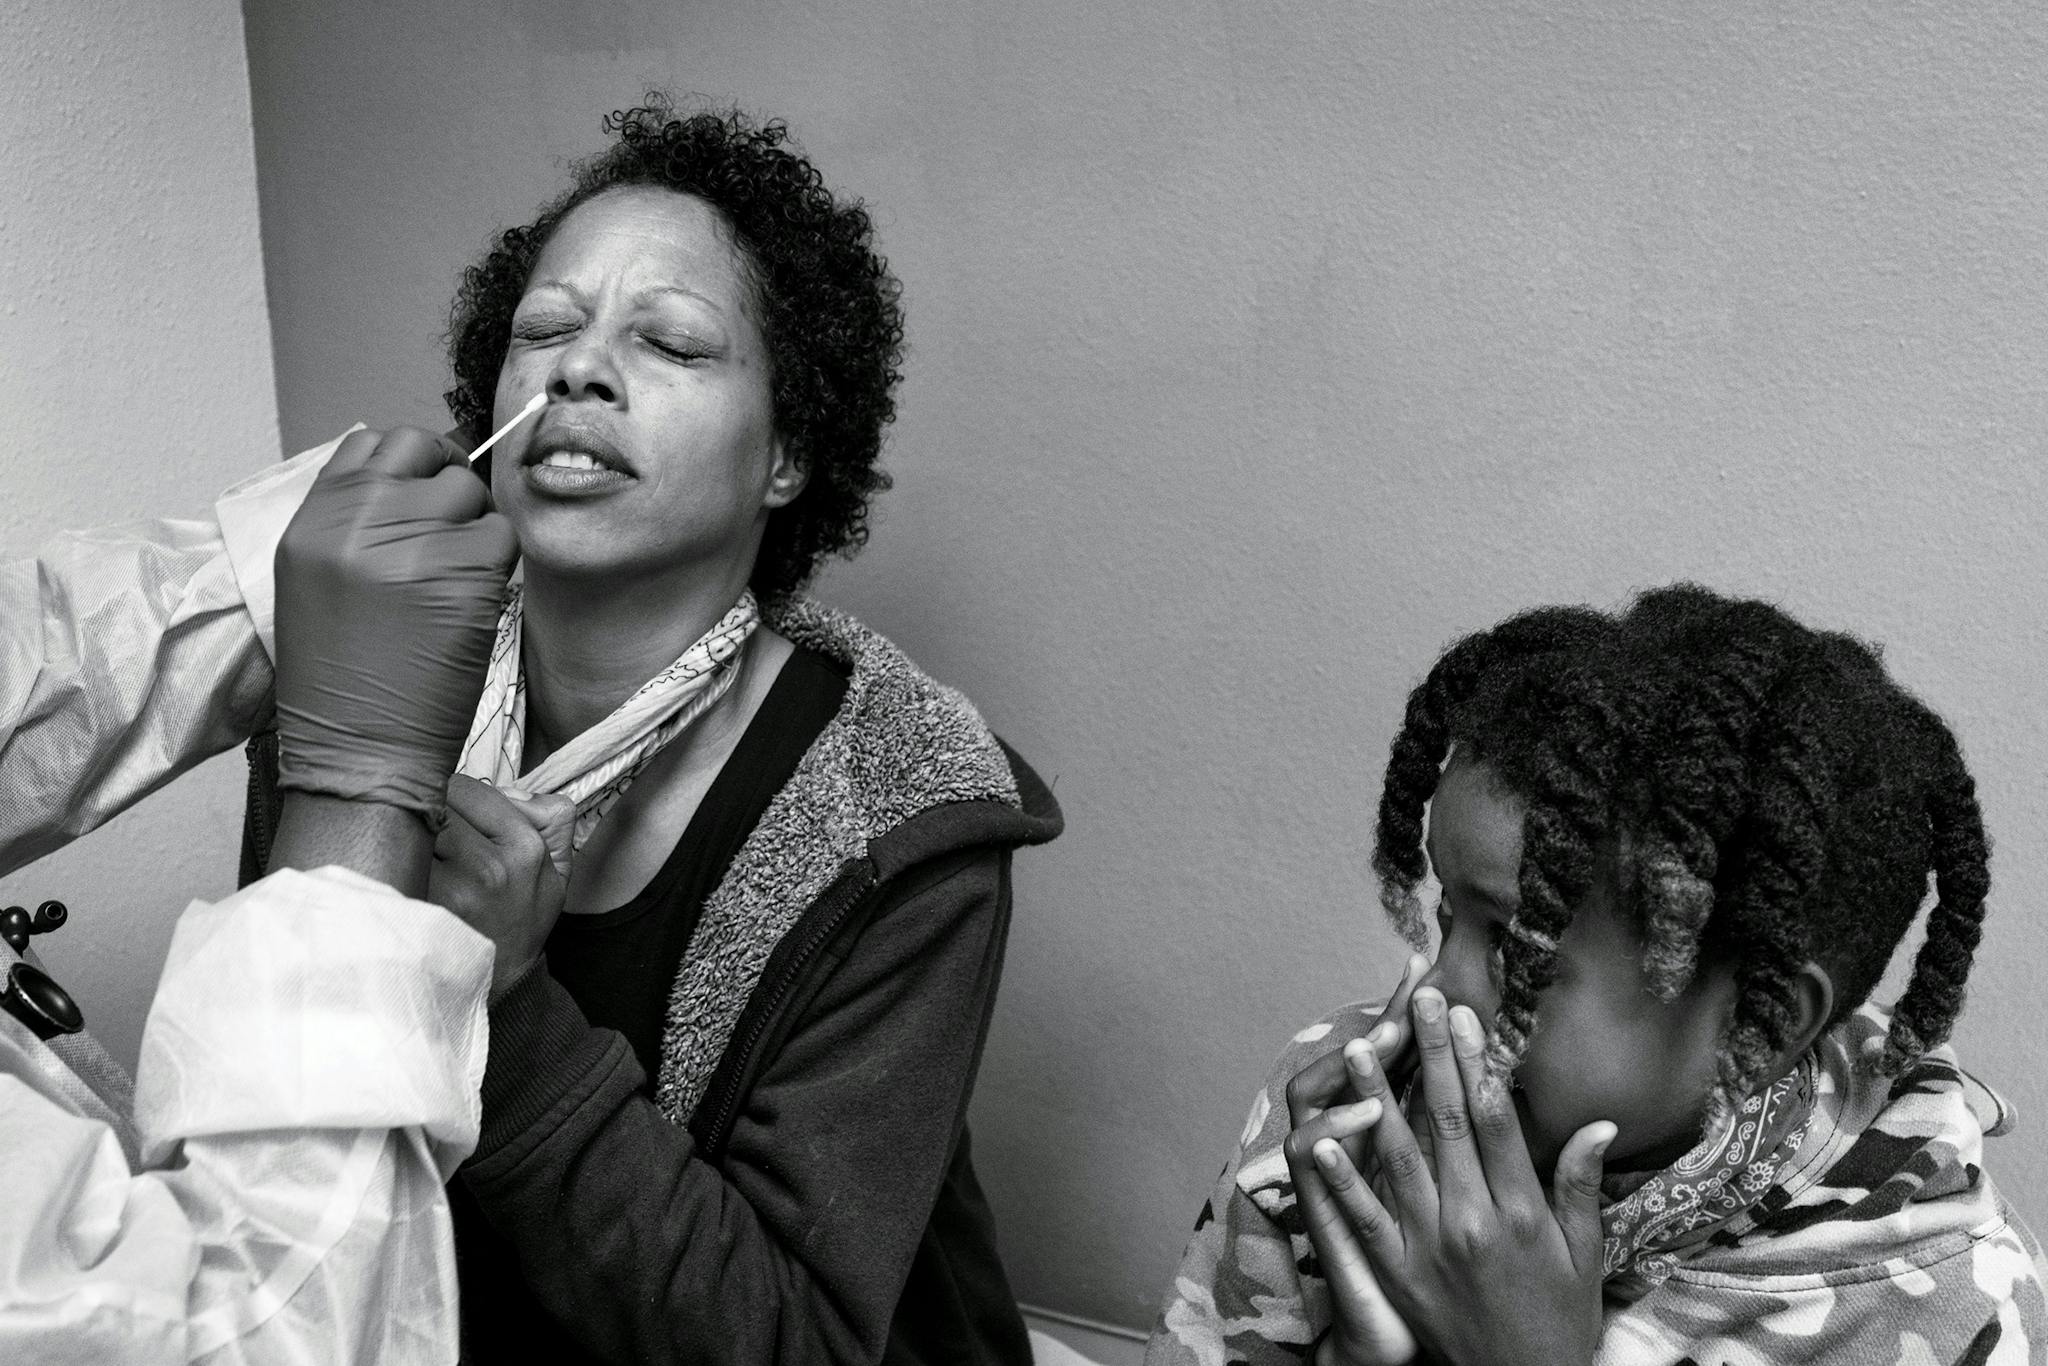 Ante Lewis, 11, watches his mother, Darline, 42, as she gets tested for COVID-19.